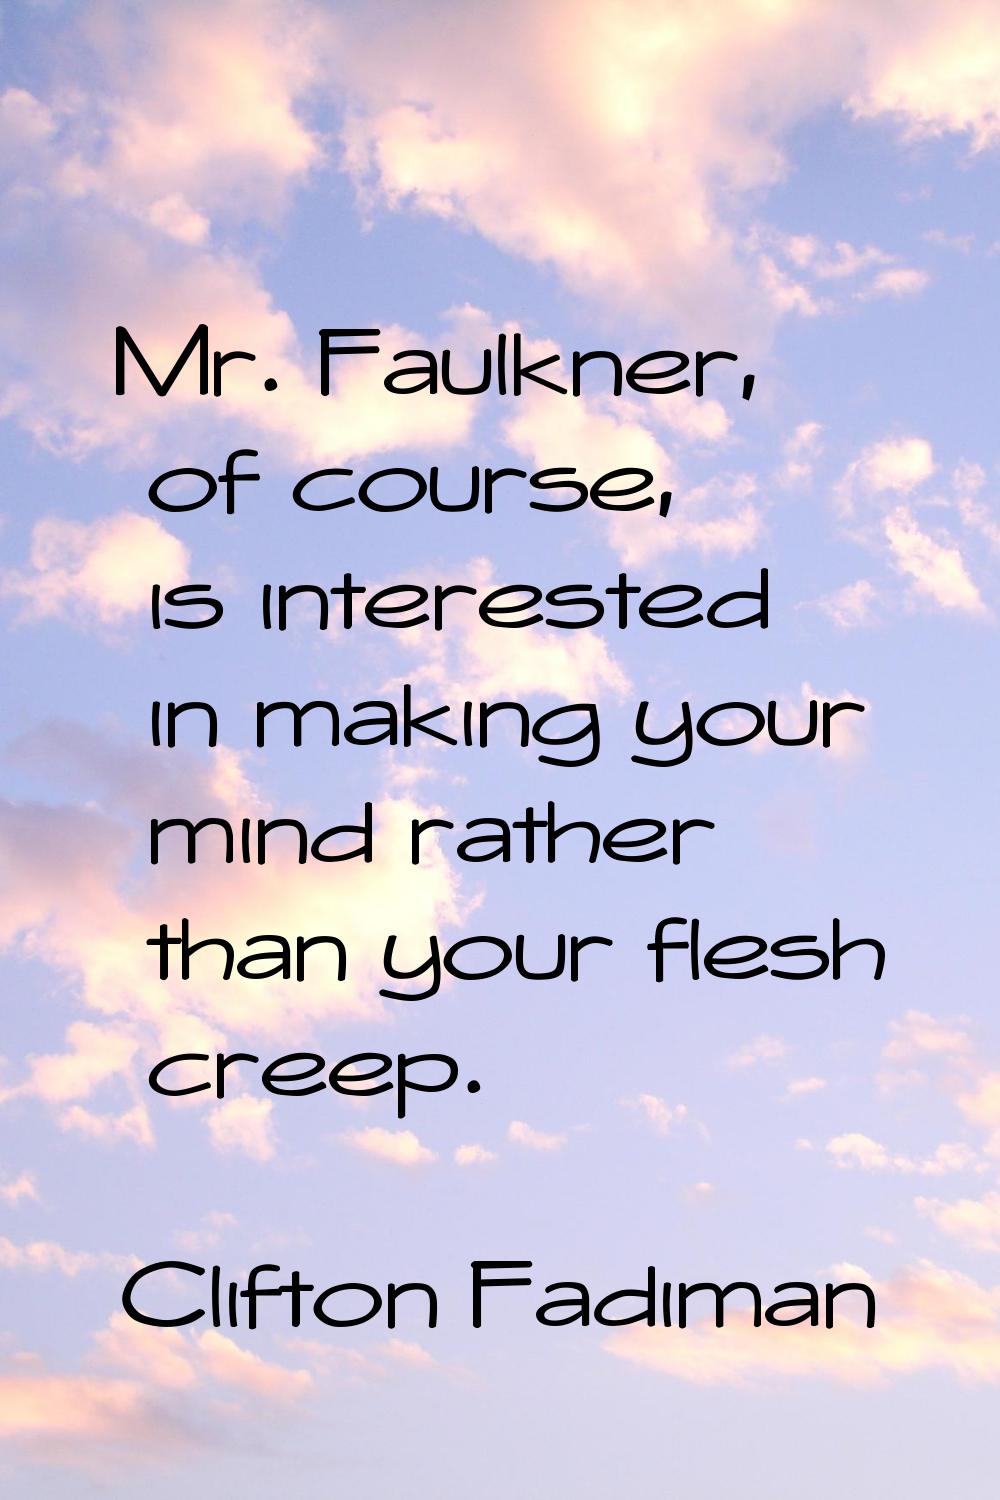 Mr. Faulkner, of course, is interested in making your mind rather than your flesh creep.